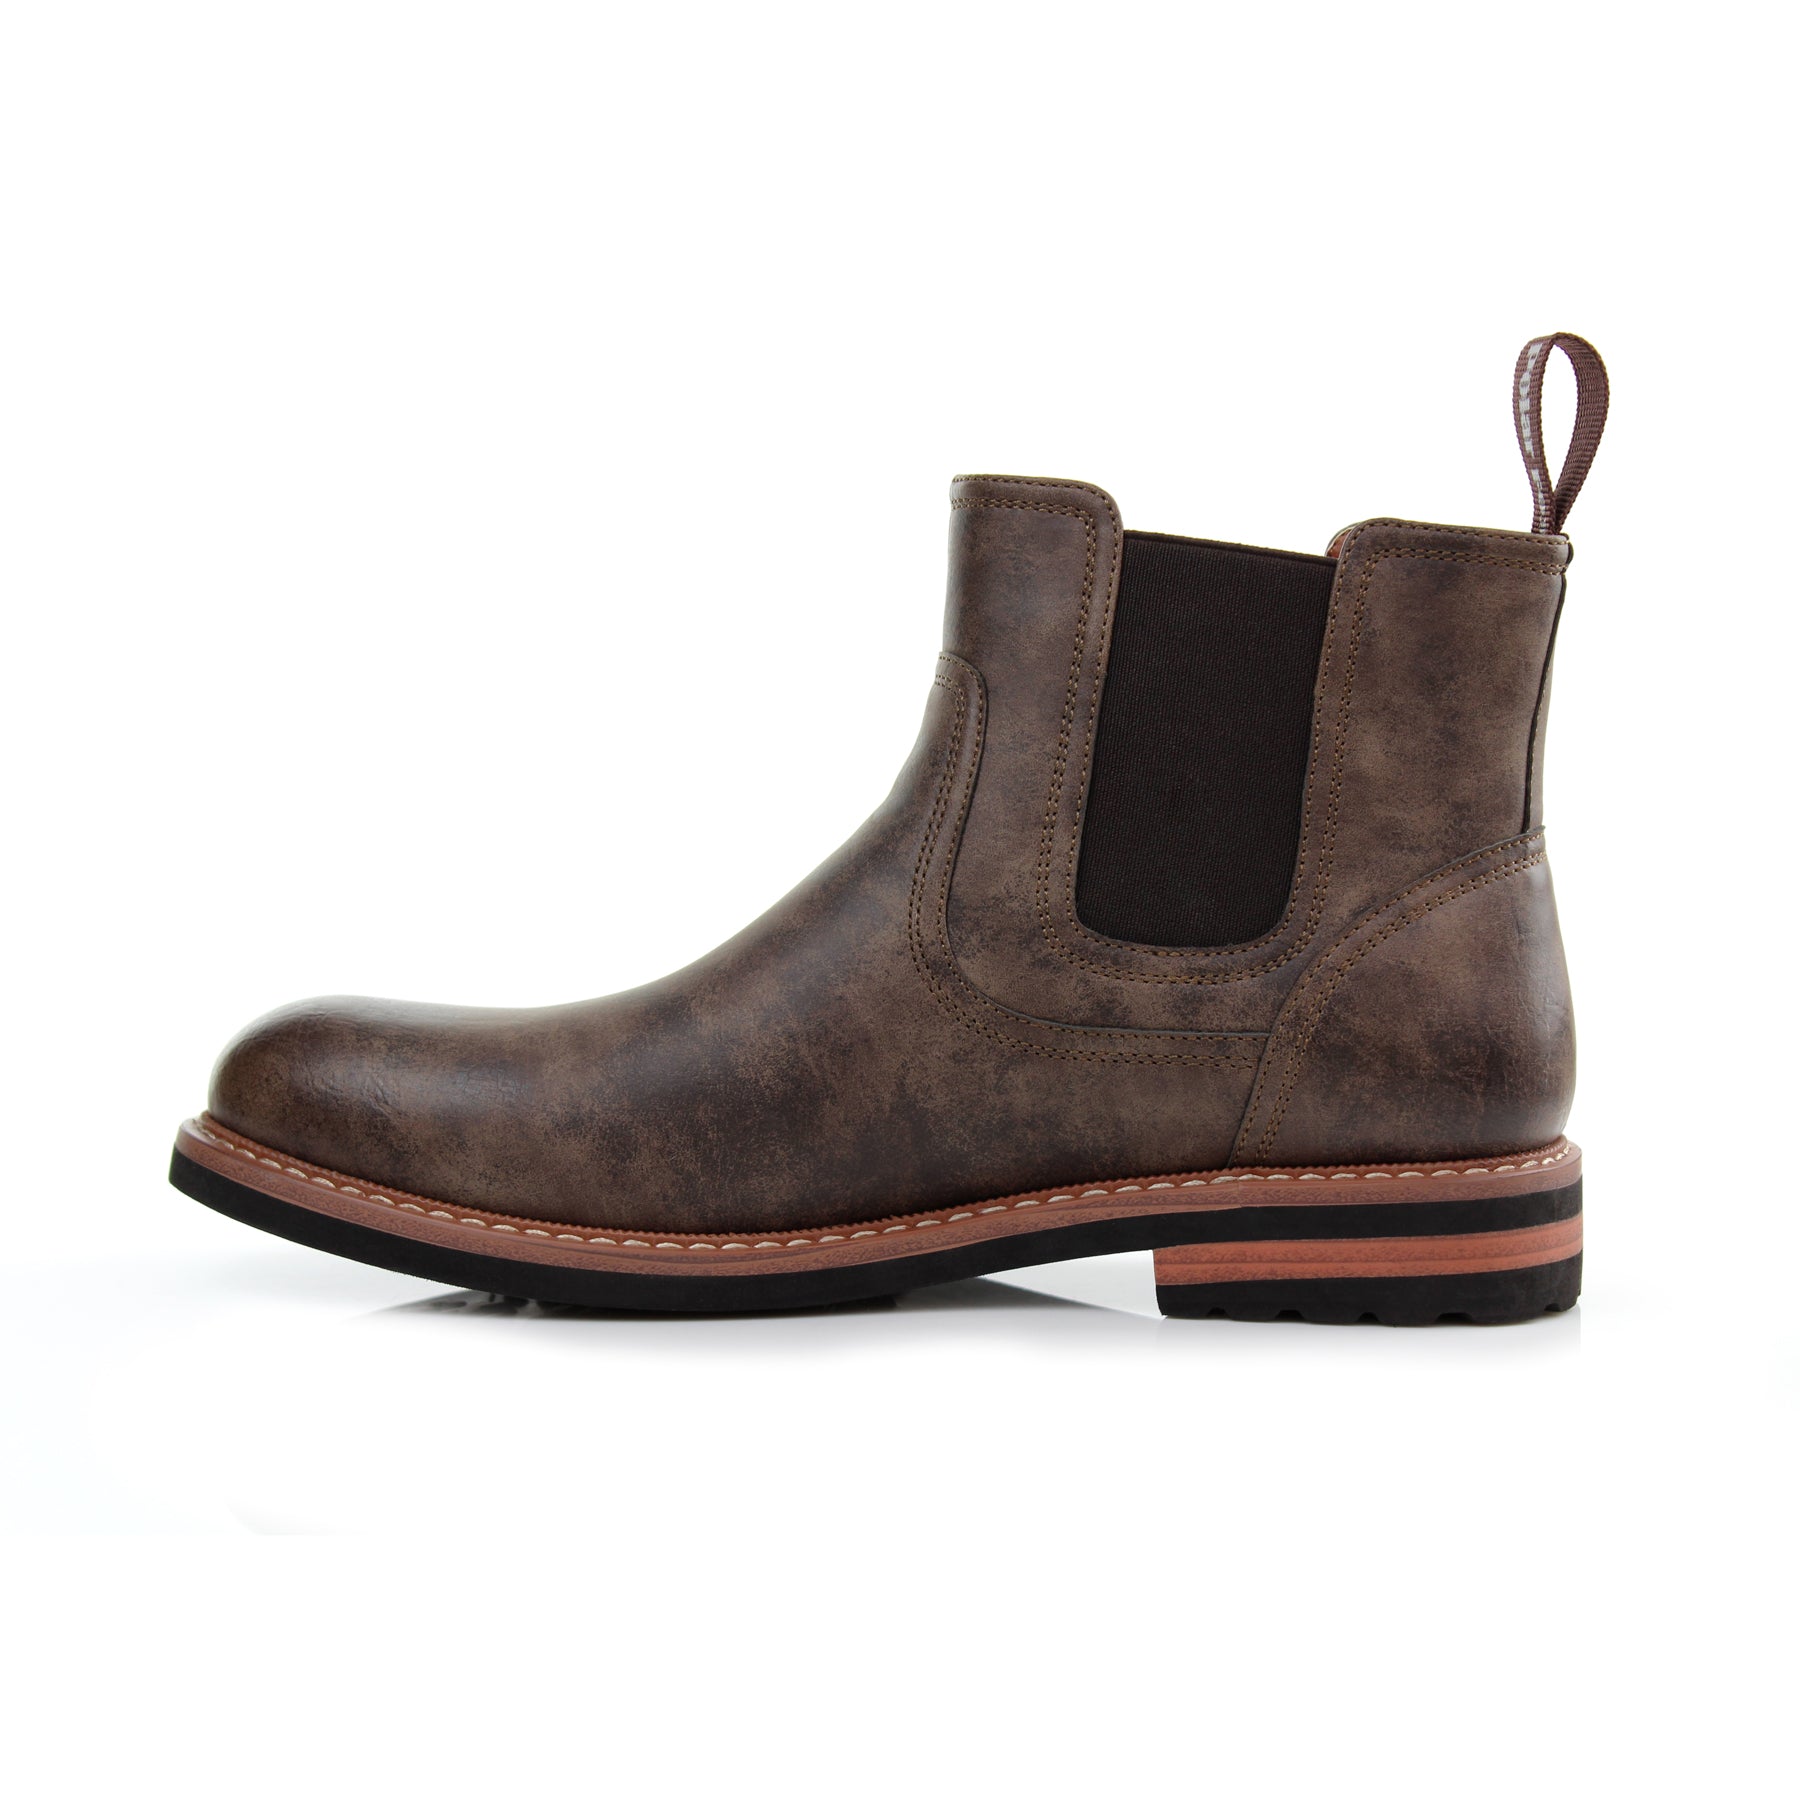 Western Style Chelsea Boots | Duncan by Polar Fox | Conal Footwear | Inner Side Angle View